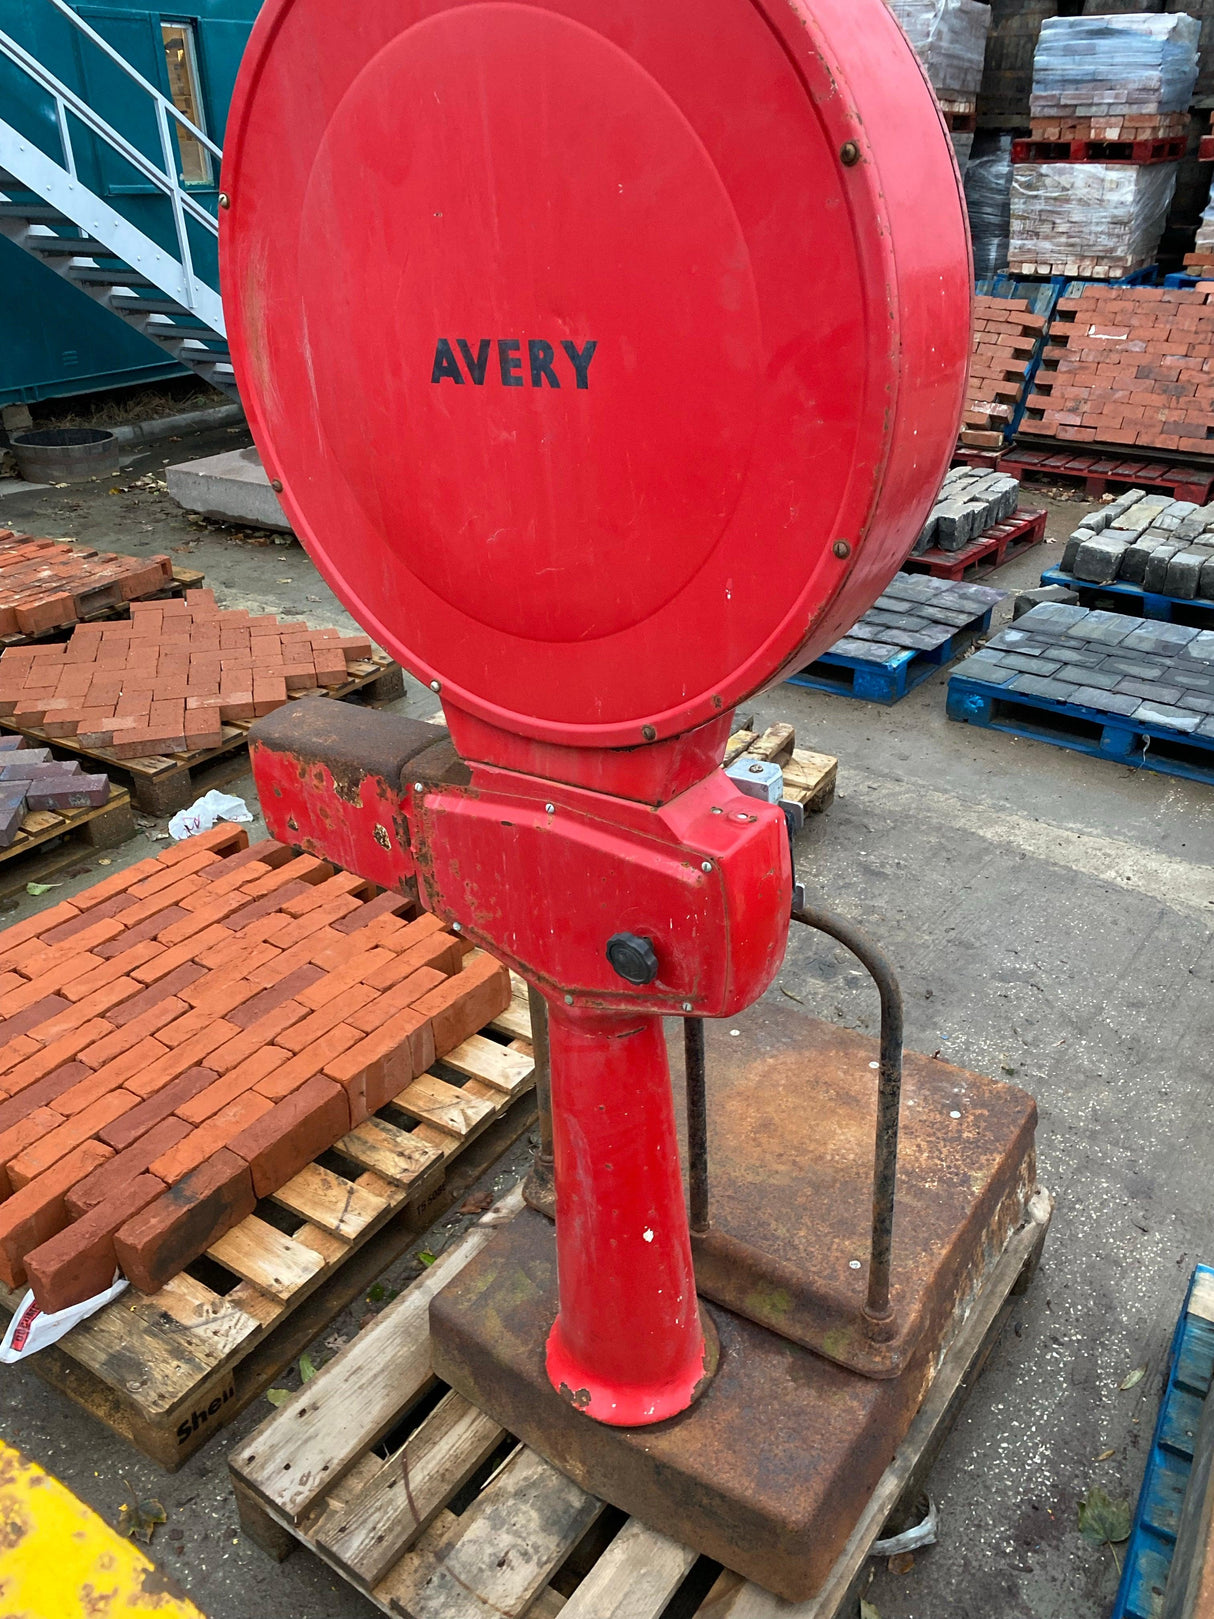 Avery Industrial Weighing Scales Red 175kg - Reclaimed Brick Company